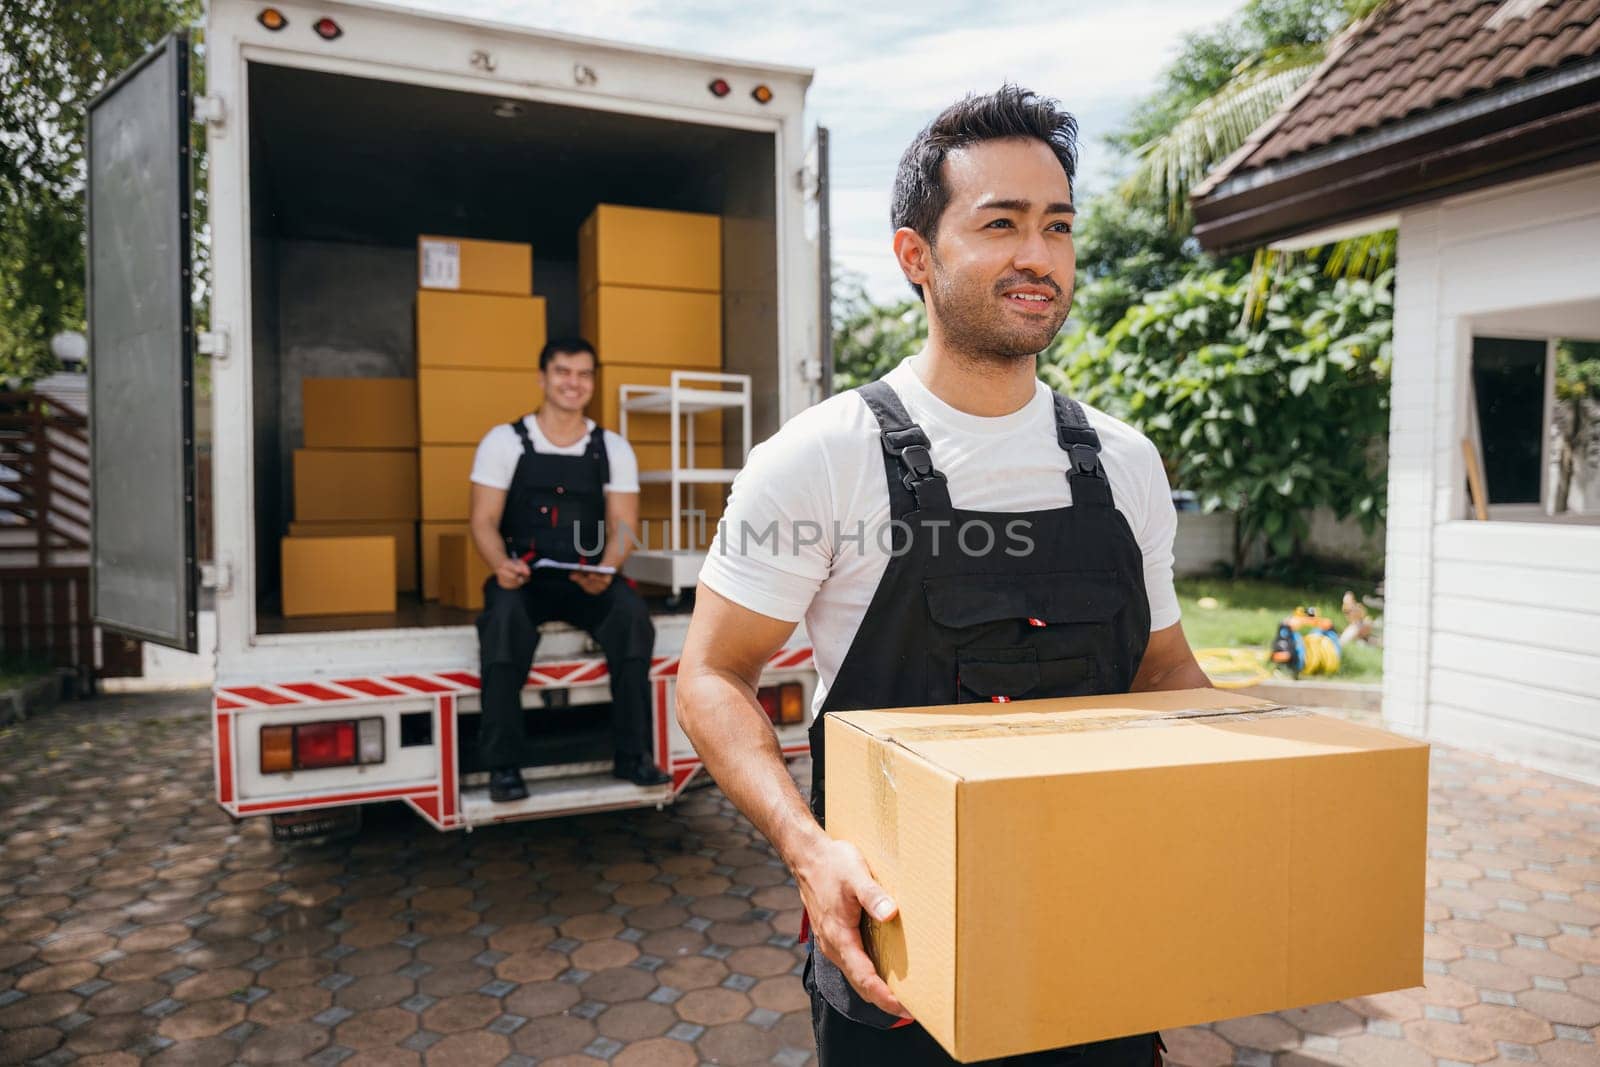 Movers unload boxes from a truck. Delivery service workers cooperate in relocation. Teamwork and cooperation in moving company. Smiling employees carrying boxes. relocation teamwork Moving Day by Sorapop